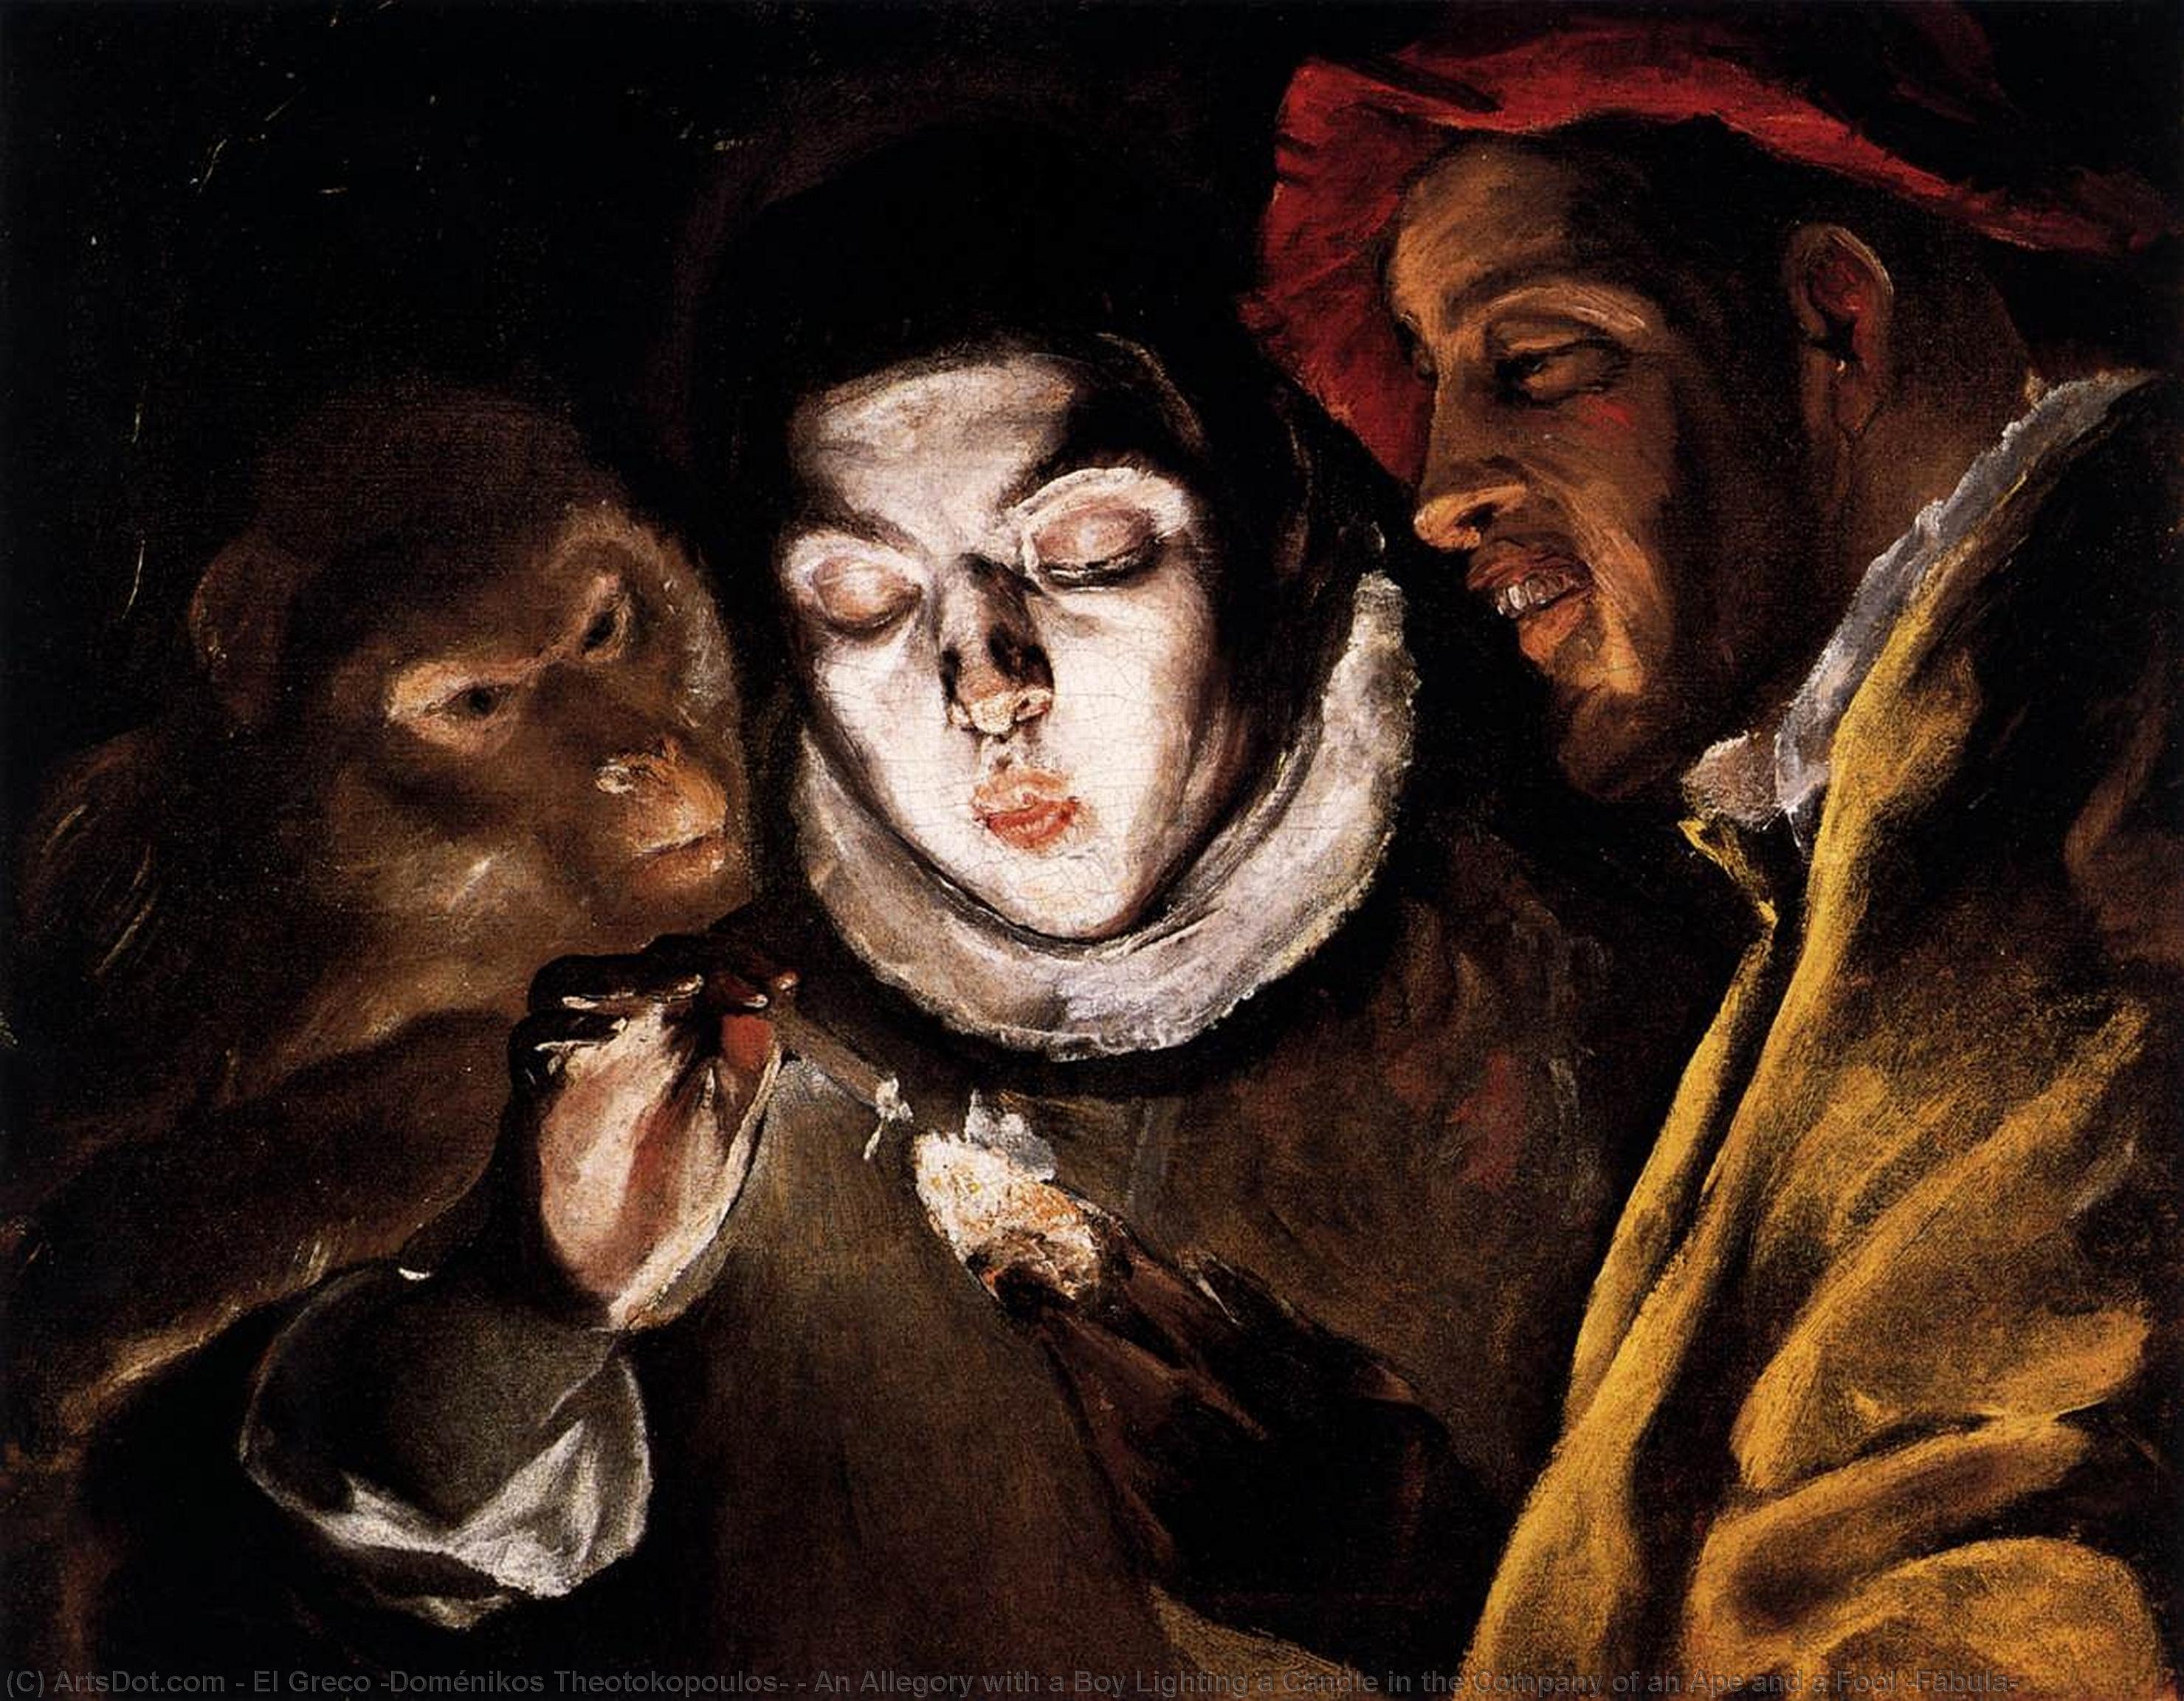 WikiOO.org - Enciclopedia of Fine Arts - Pictura, lucrări de artă El Greco (Doménikos Theotokopoulos) - An Allegory with a Boy Lighting a Candle in the Company of an Ape and a Fool (Fábula)